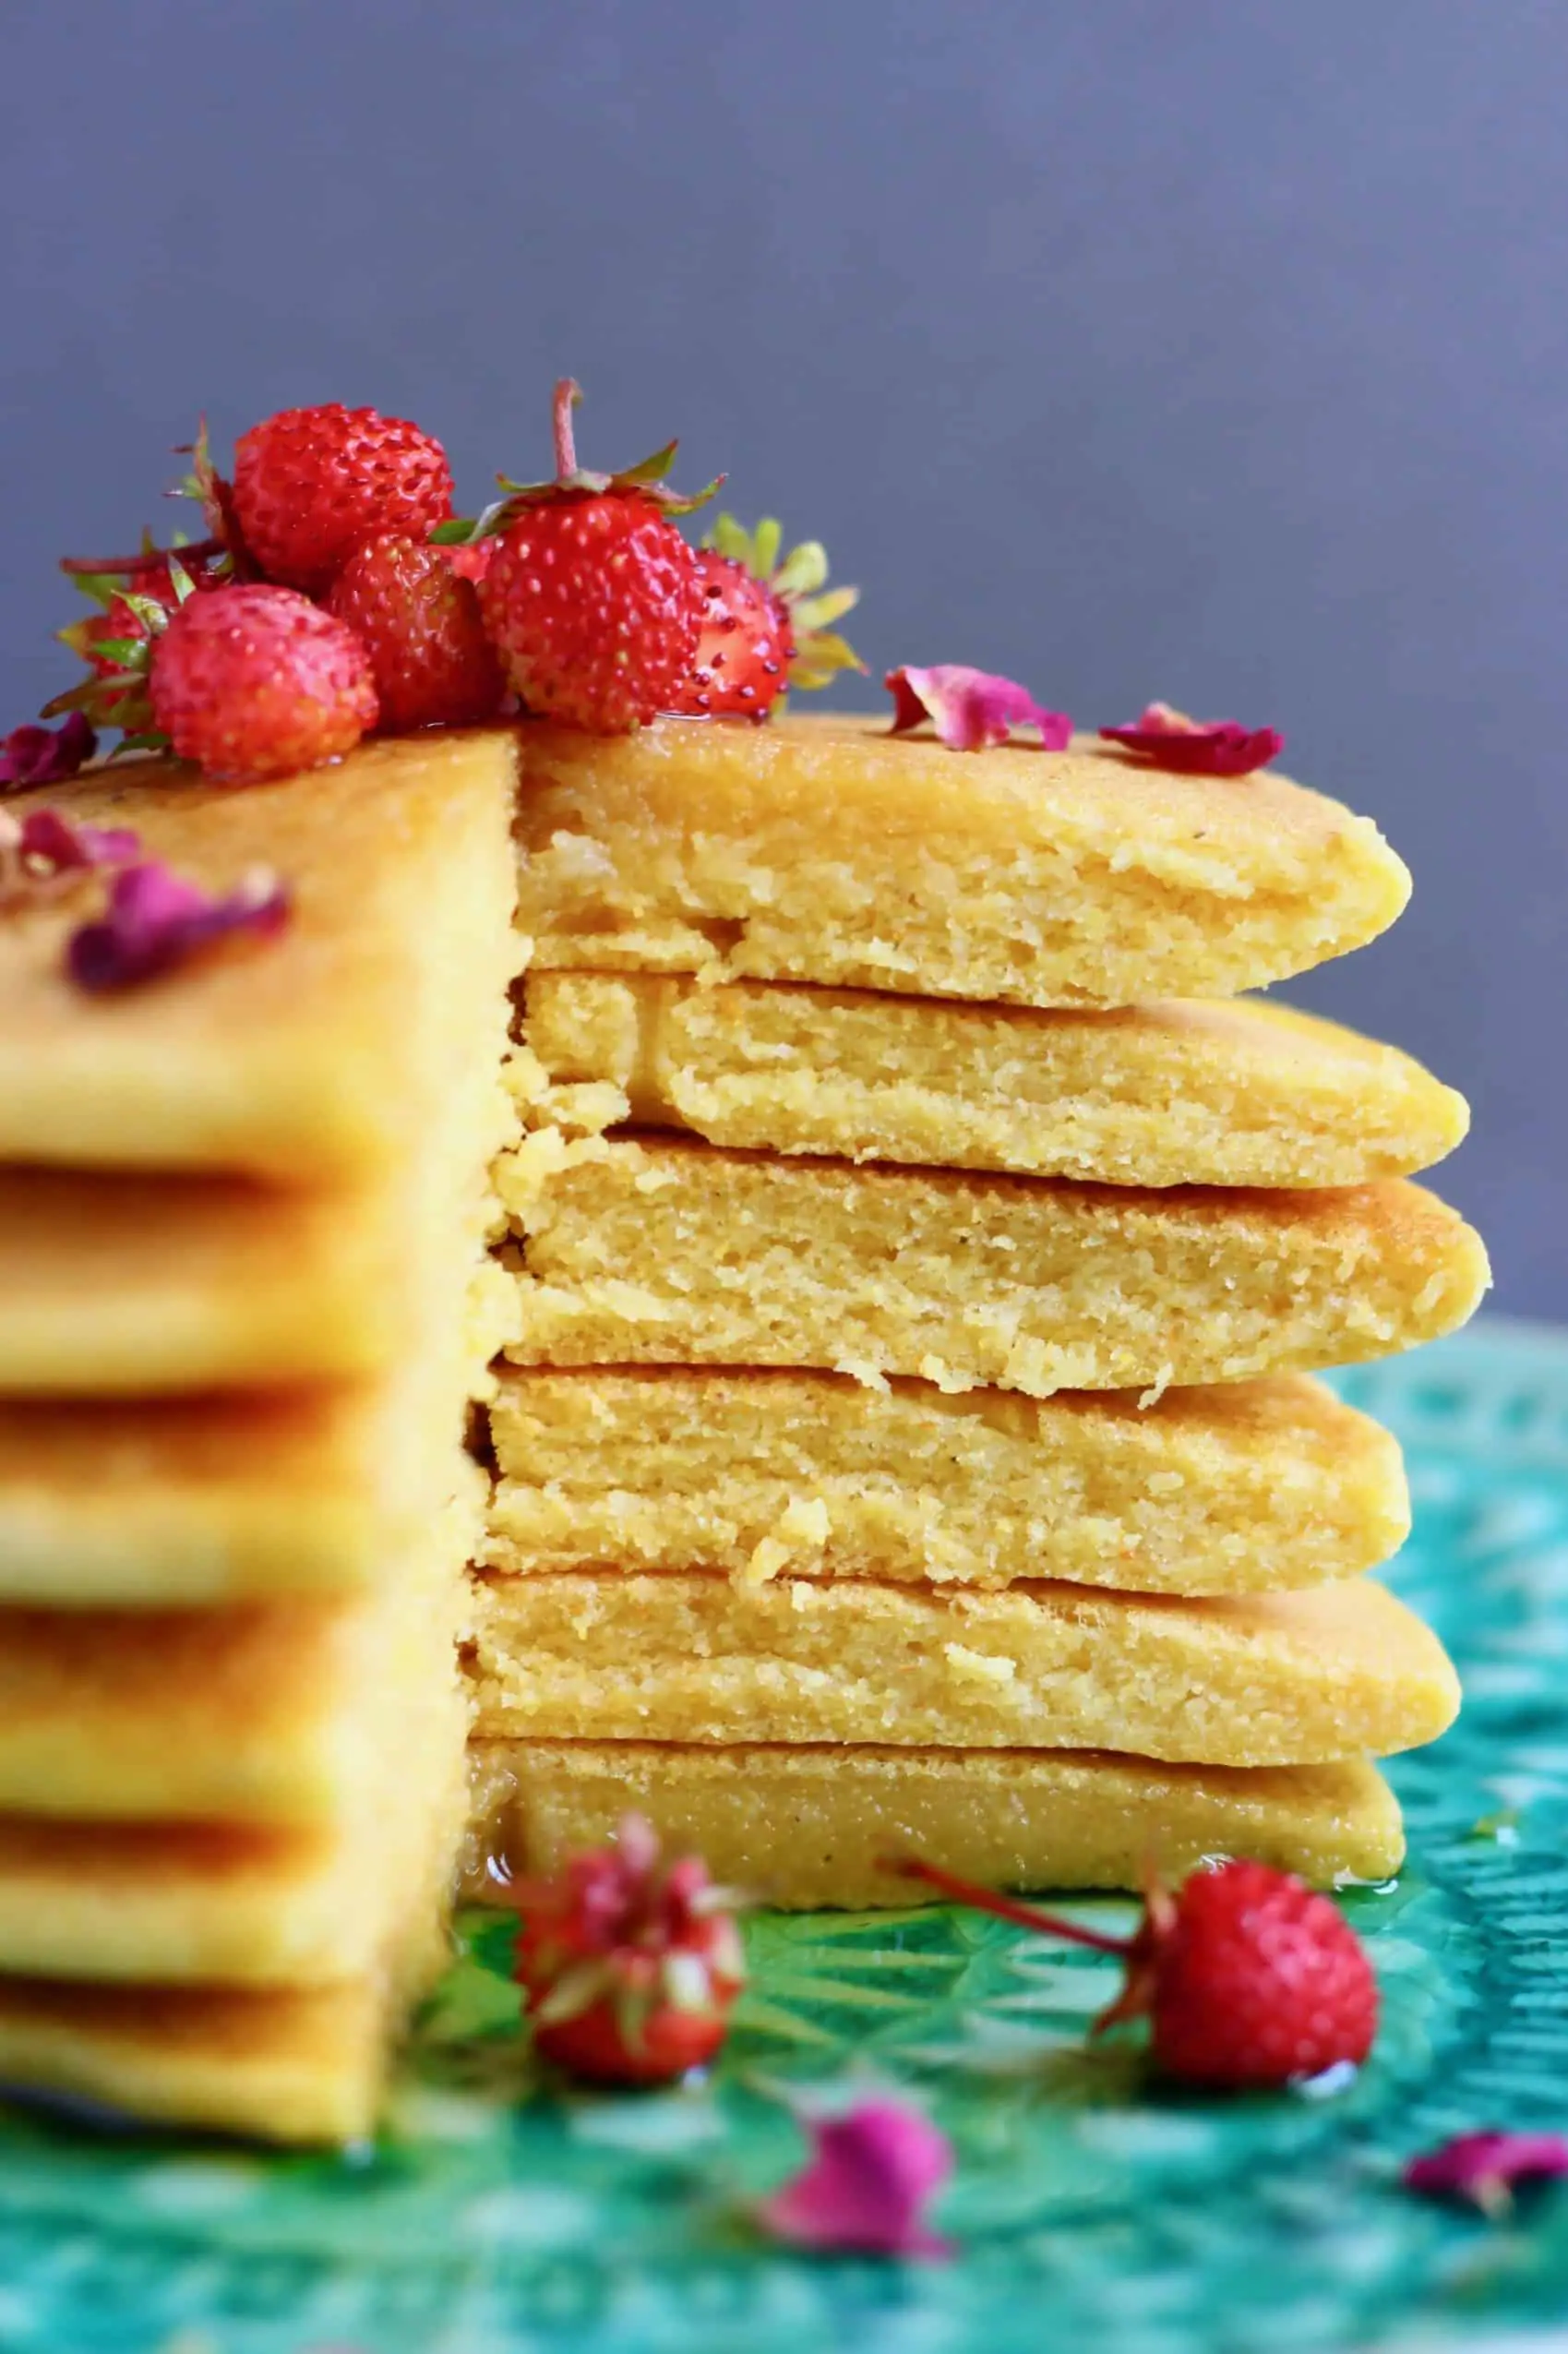 A stack of gluten-free vegan cornmeal pancakes with a slice cut out of them topped with rose petals and small strawberries on a plate